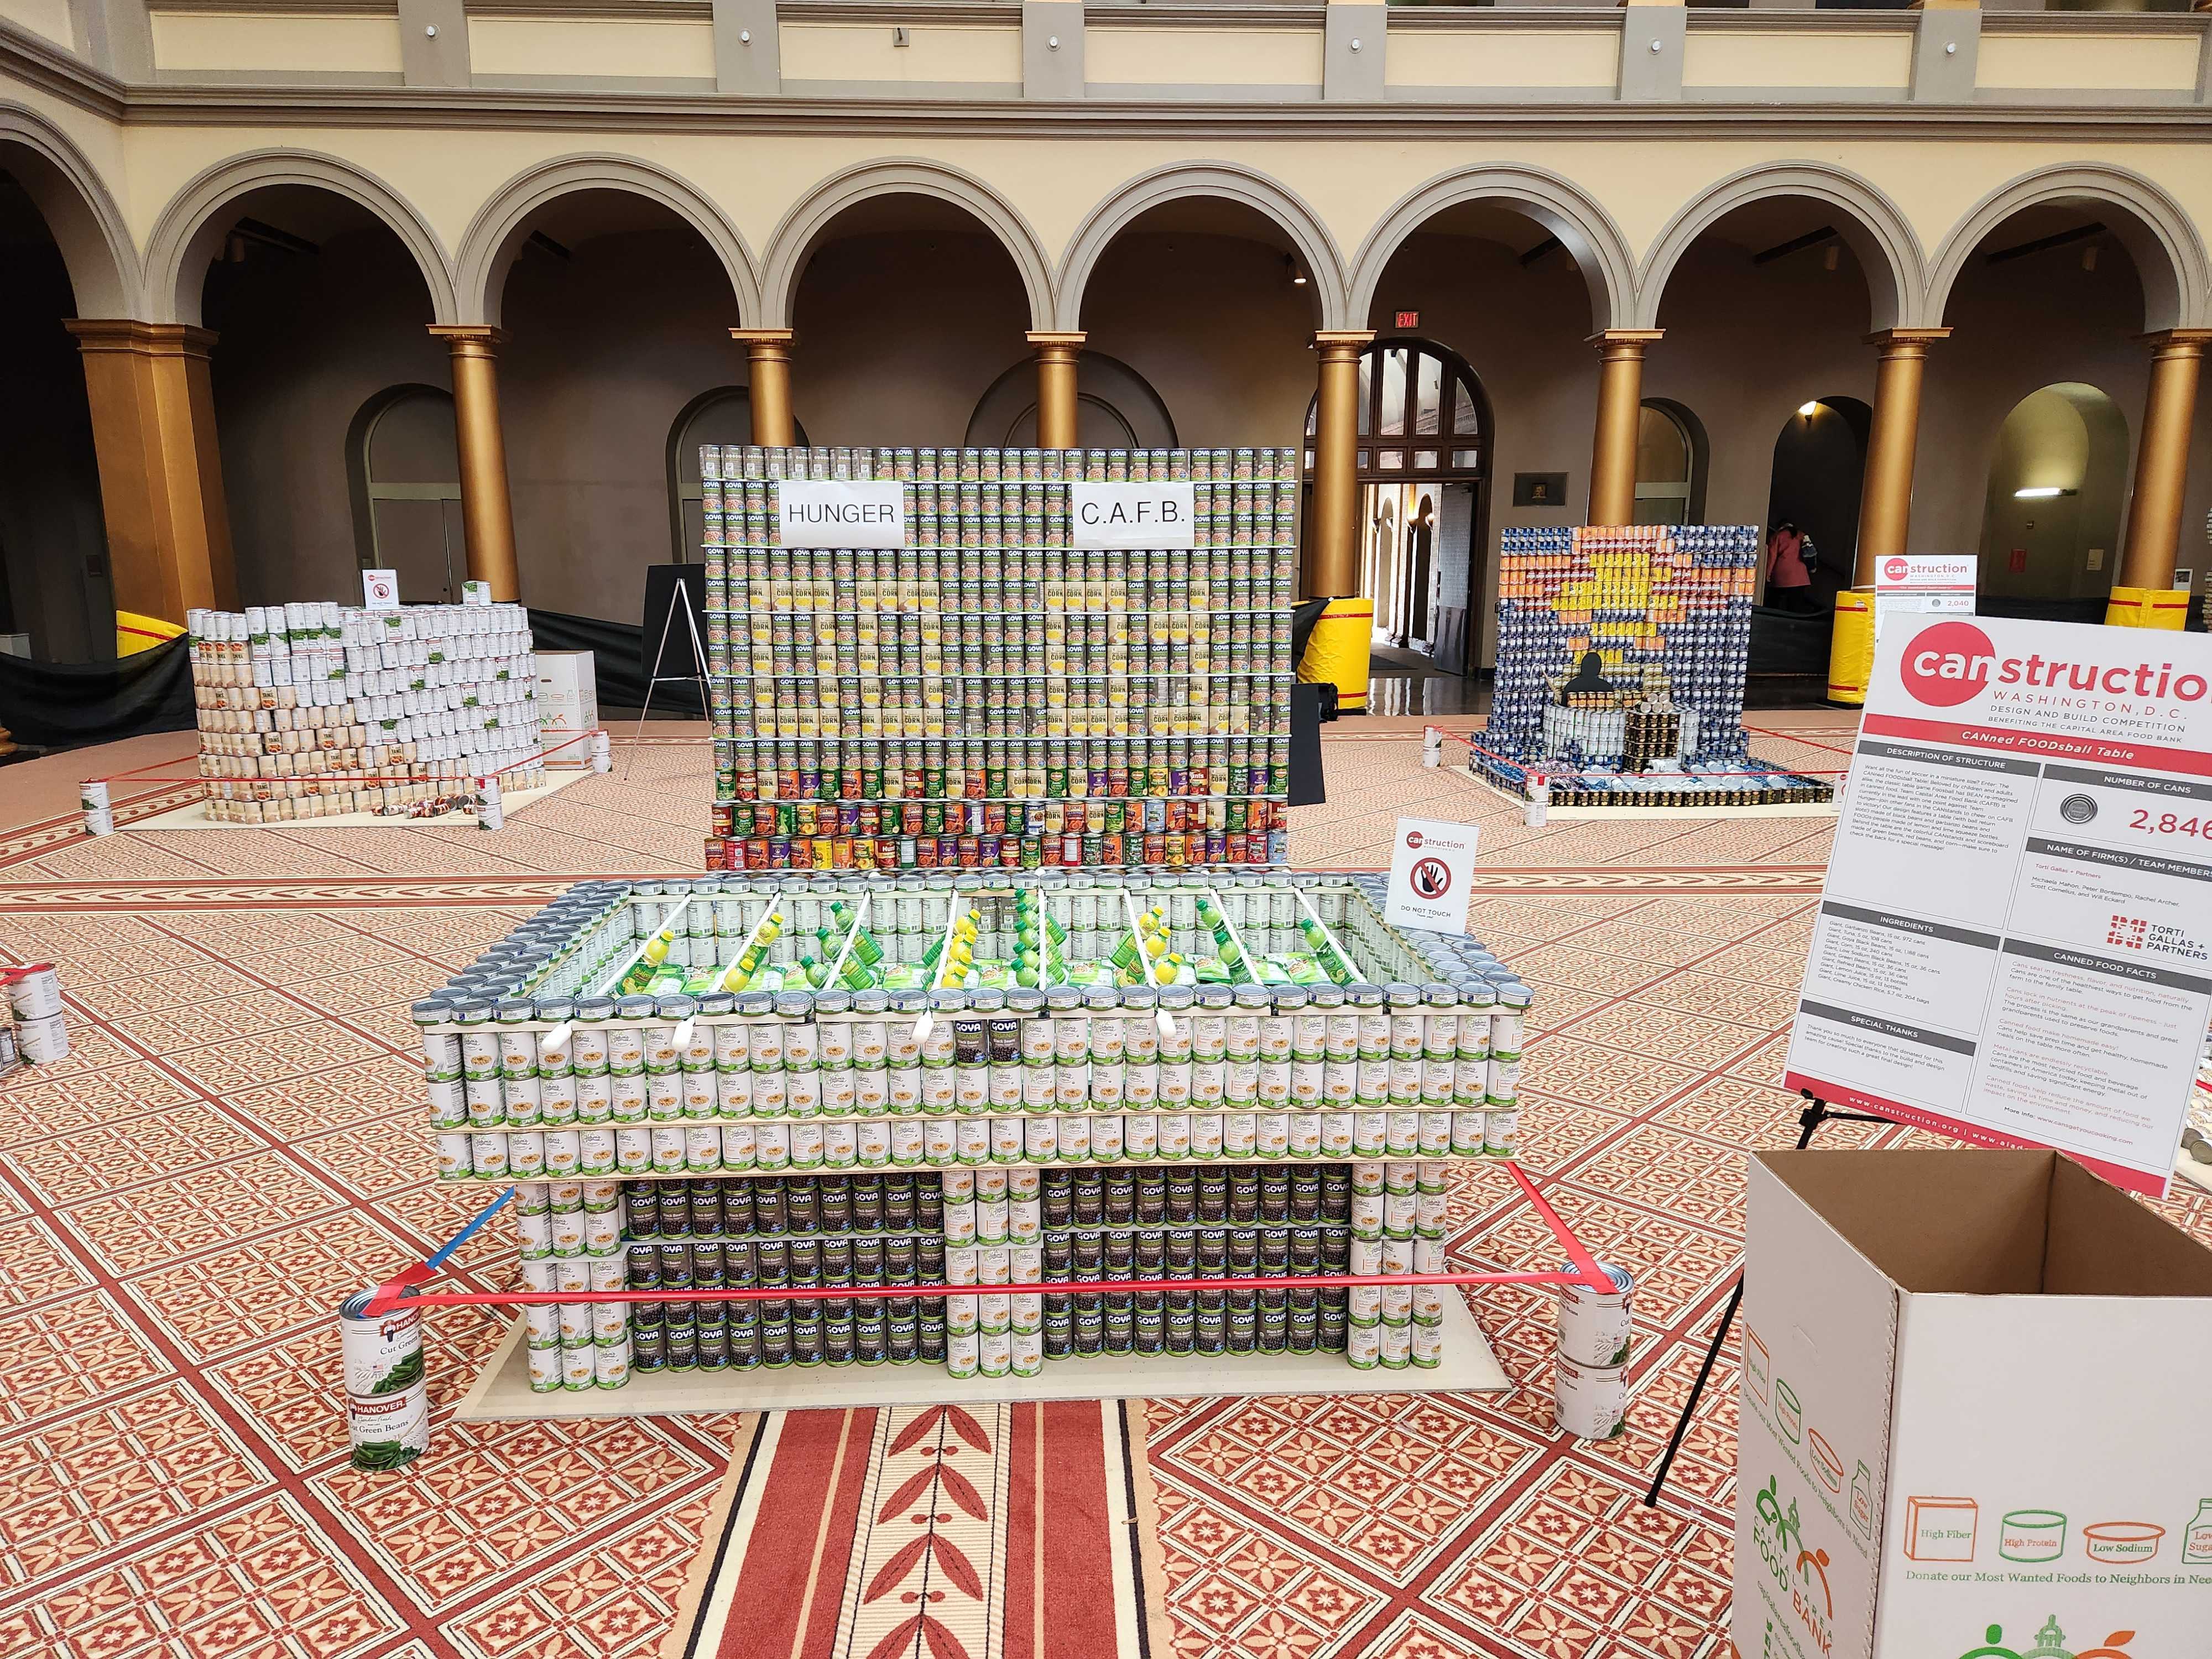 Image of canned food sculpture in shape of foosball table